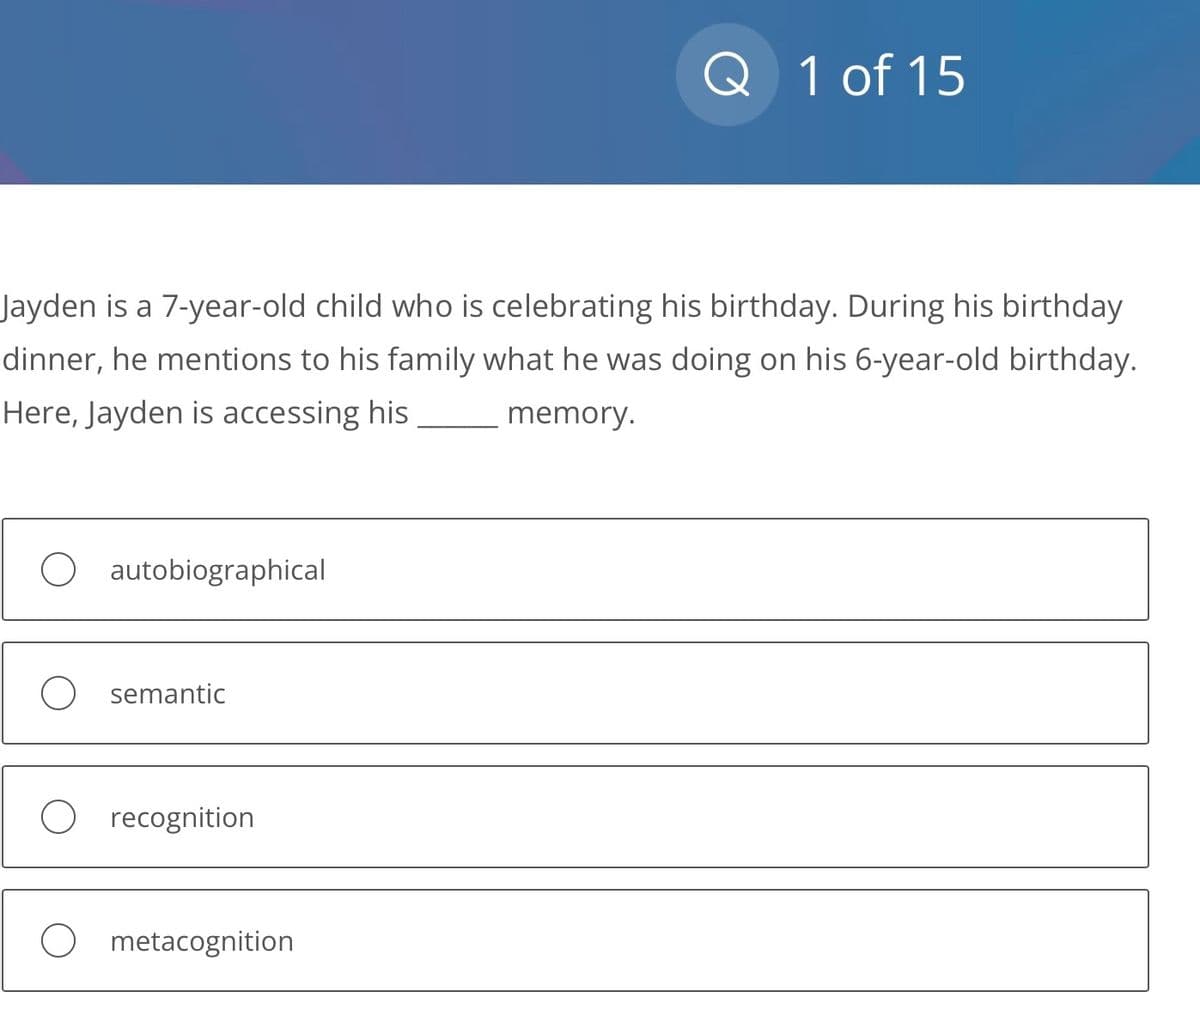 Jayden is a 7-year-old child who is celebrating his birthday. During his birthday
dinner, he mentions to his family what he was doing on his 6-year-old birthday.
Here, Jayden is accessing his memory.
O autobiographical
O semantic
recognition
Q 1 of 15
metacognition